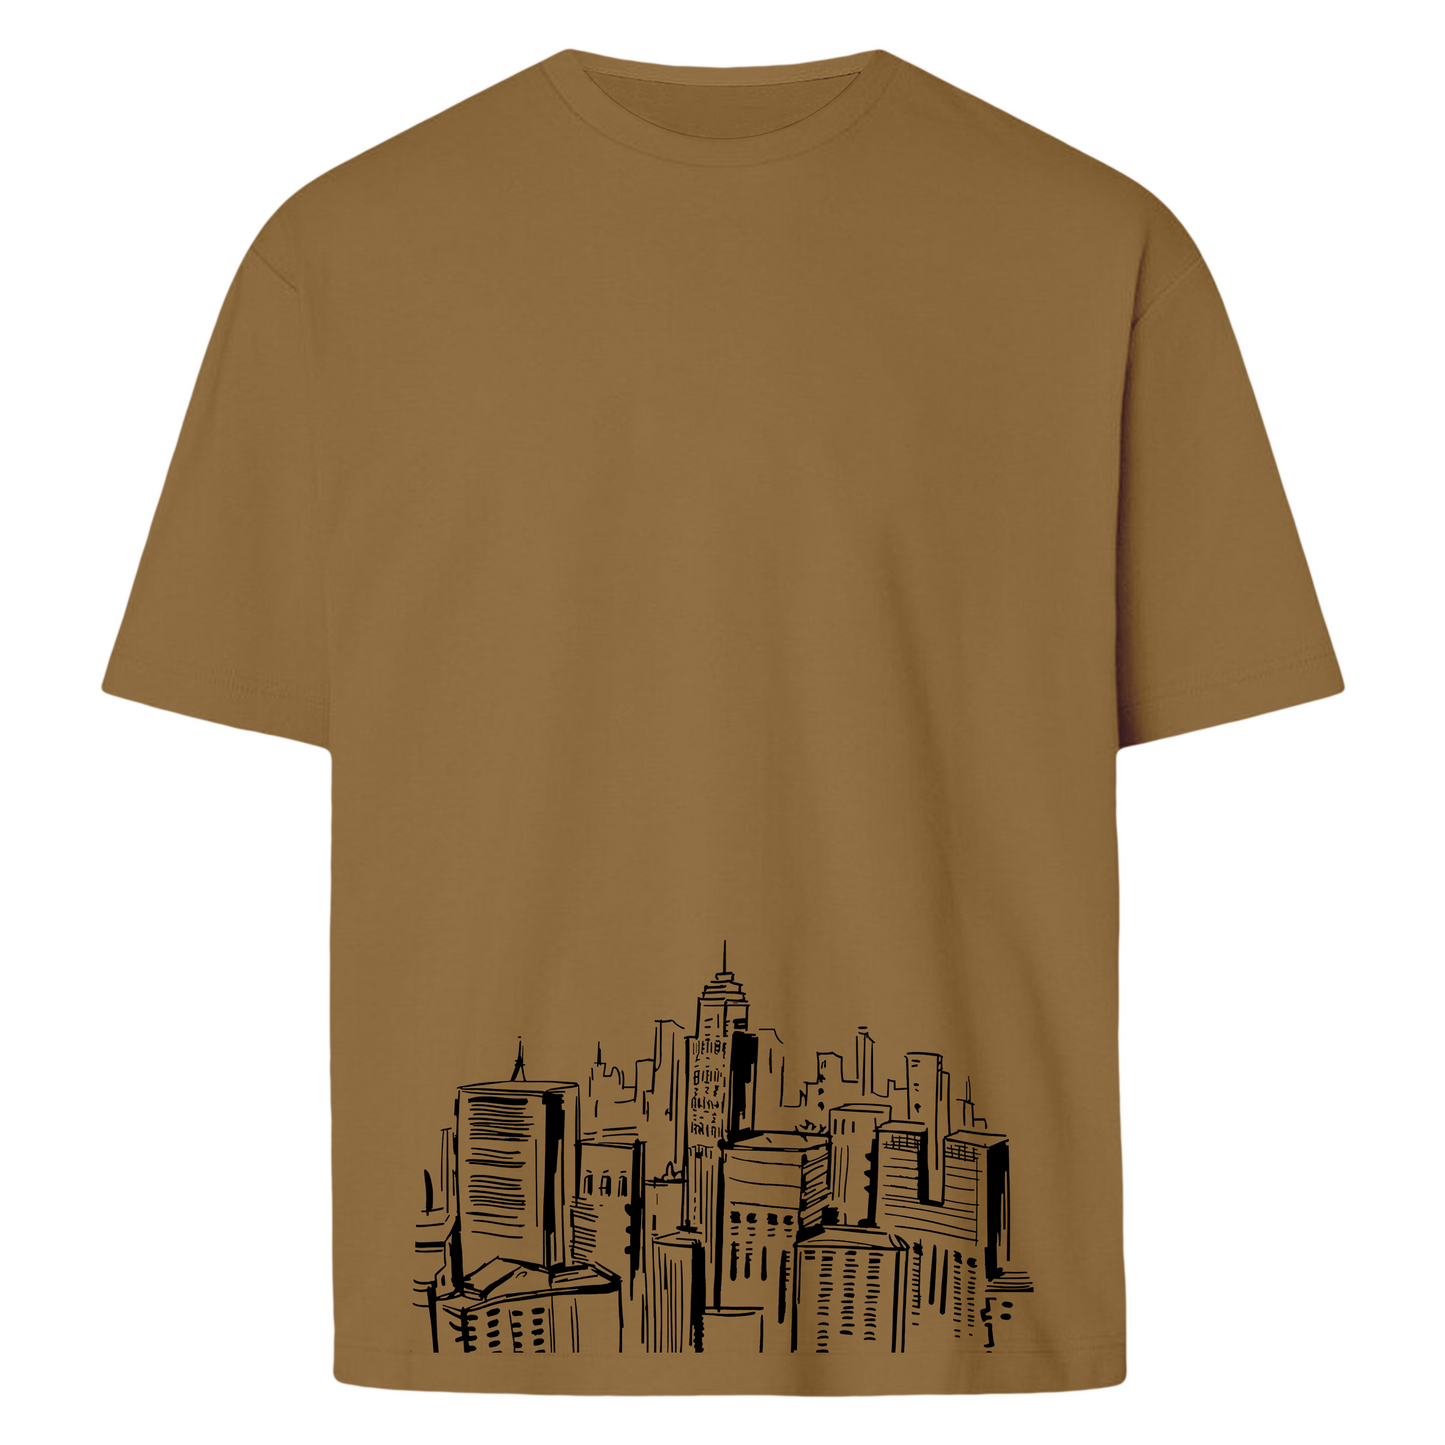 The lost City - T-shirt